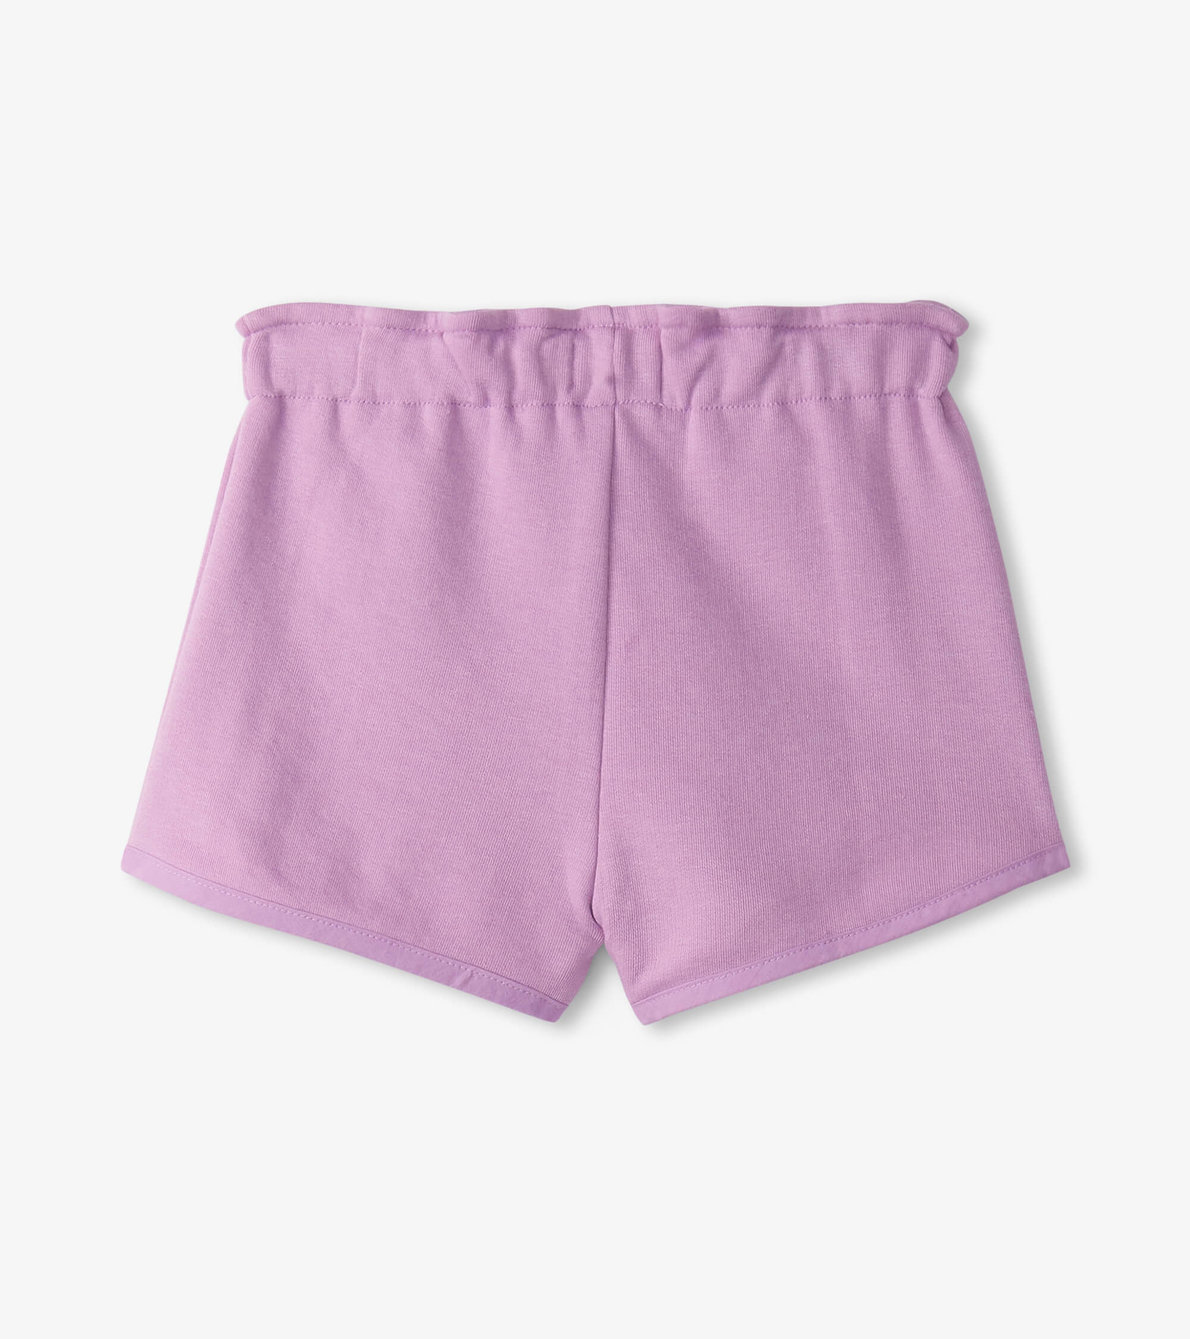 View larger image of Girls Lilac Paper Bag Shorts